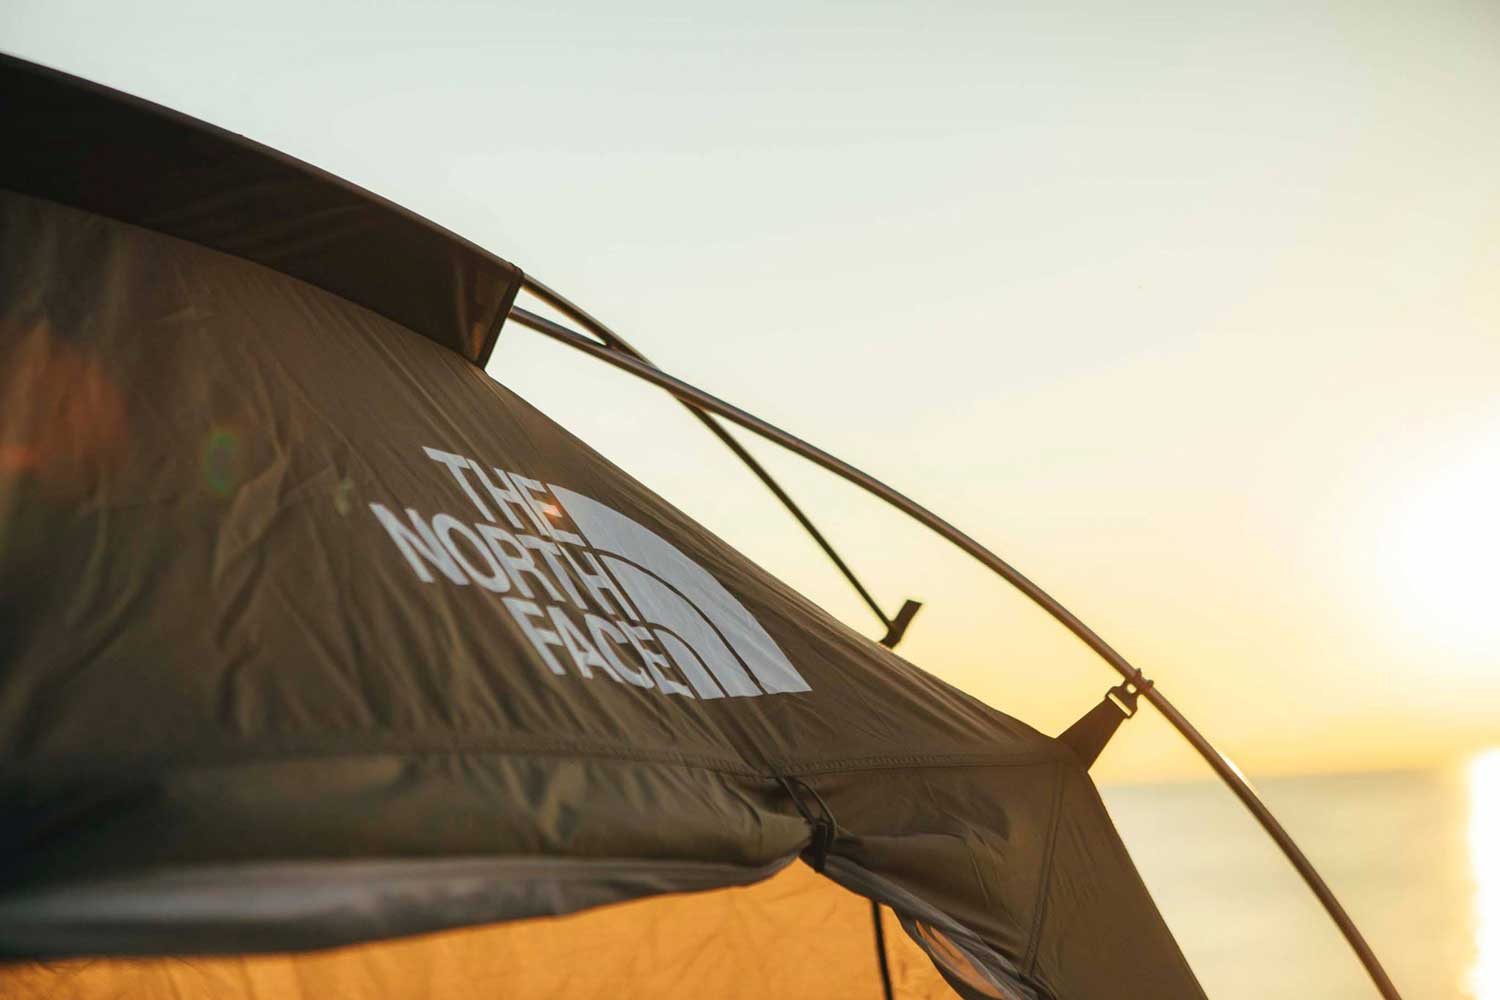 THE NORTH FACE 2020 S/S EQUIPMENT CAMPING